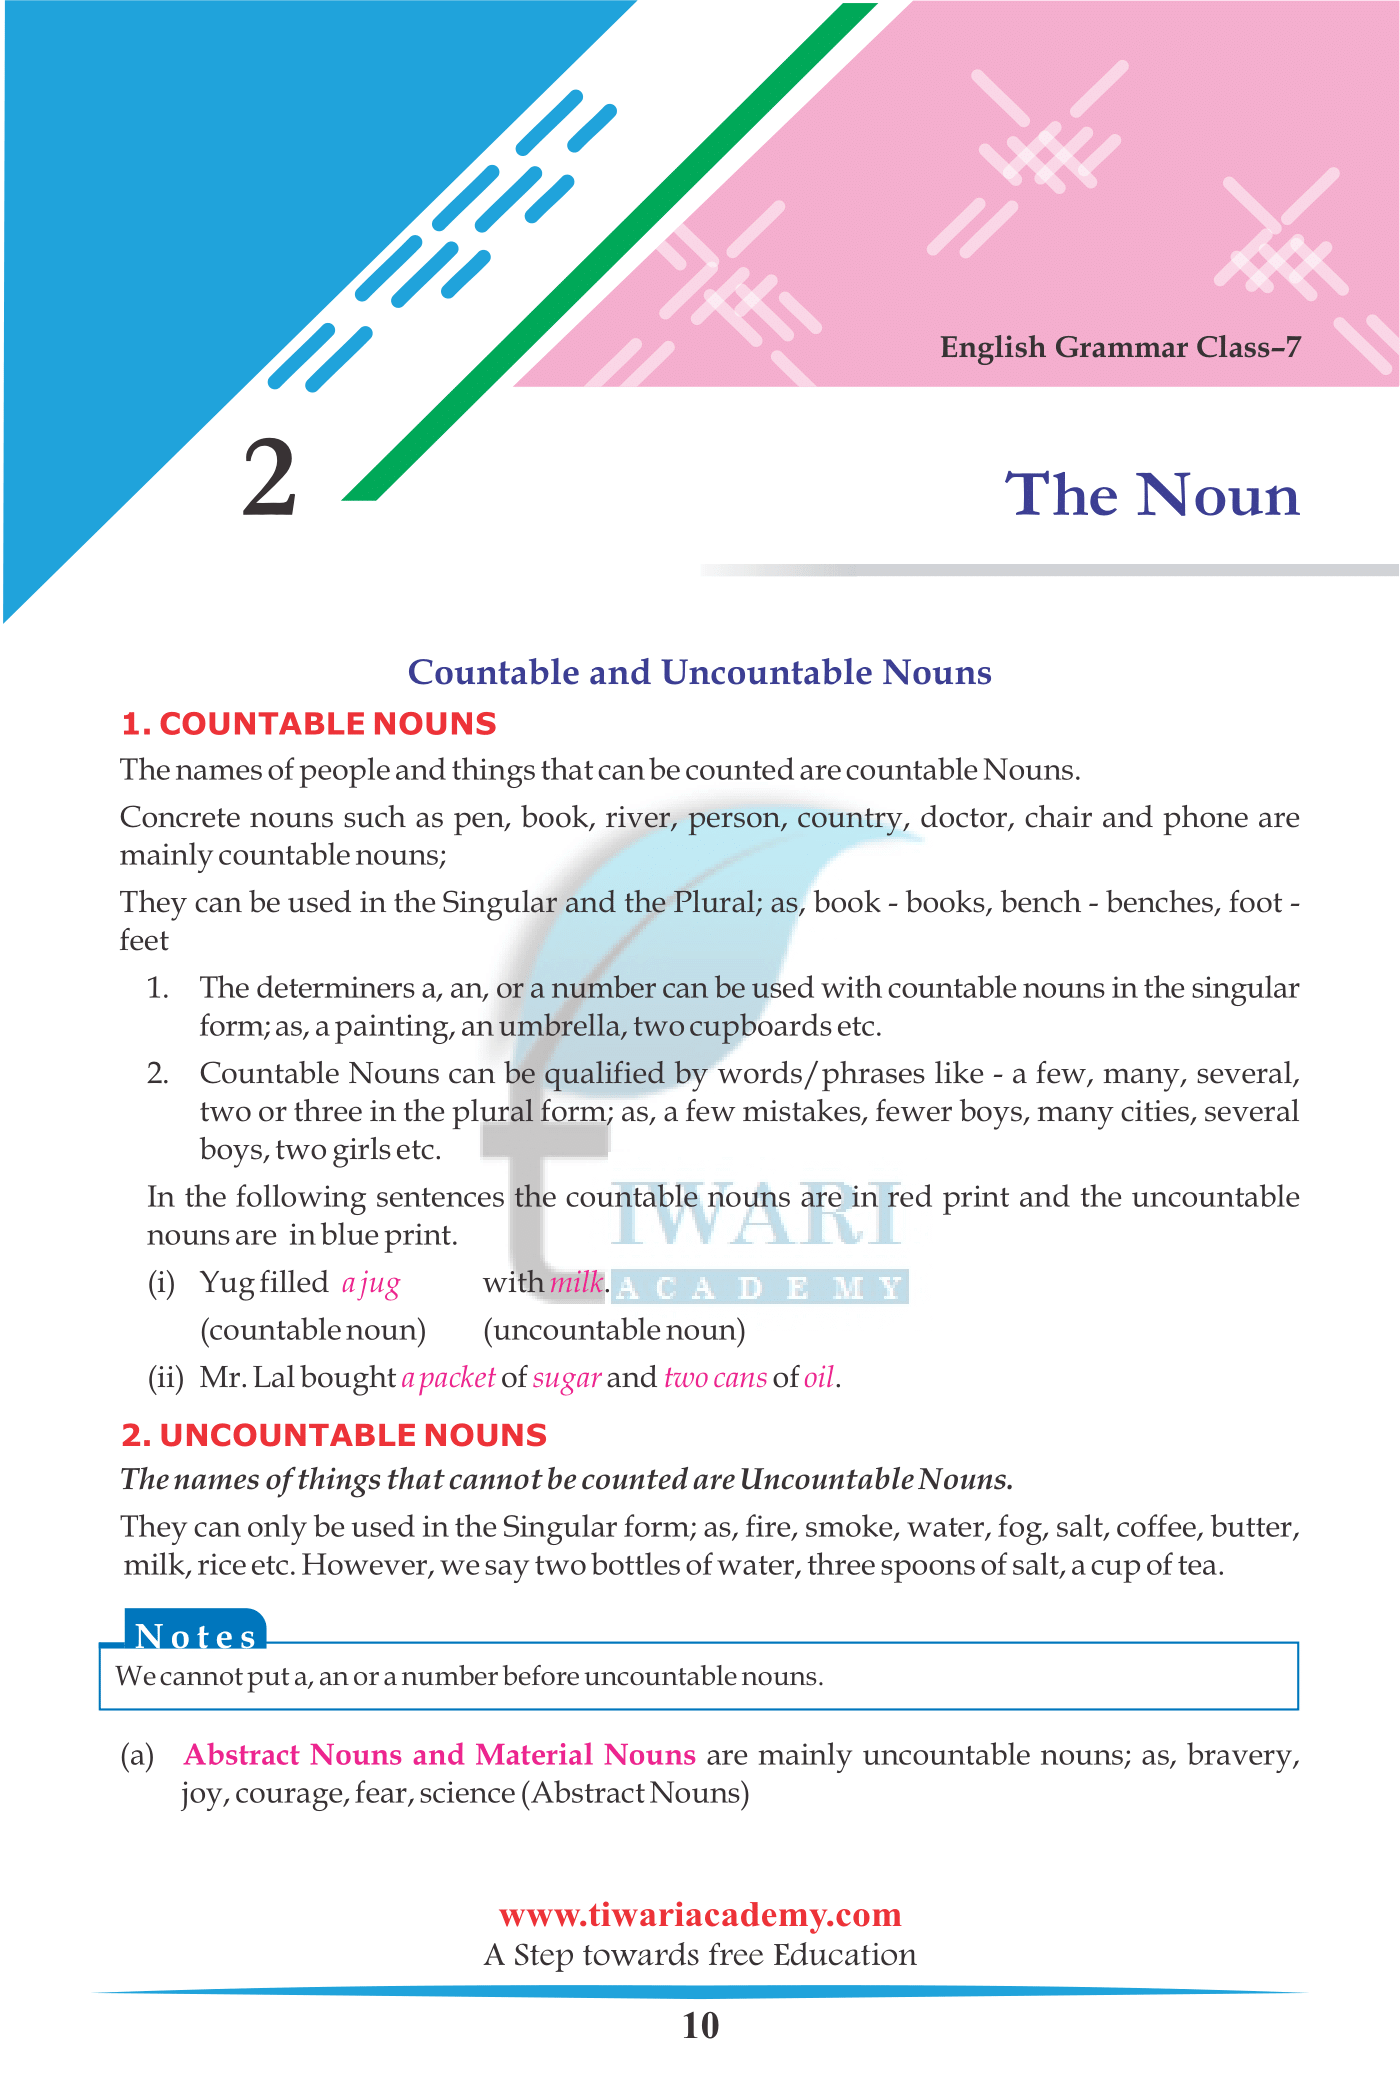 Class 7 English Grammar Chapter 2 The Noun and its kind